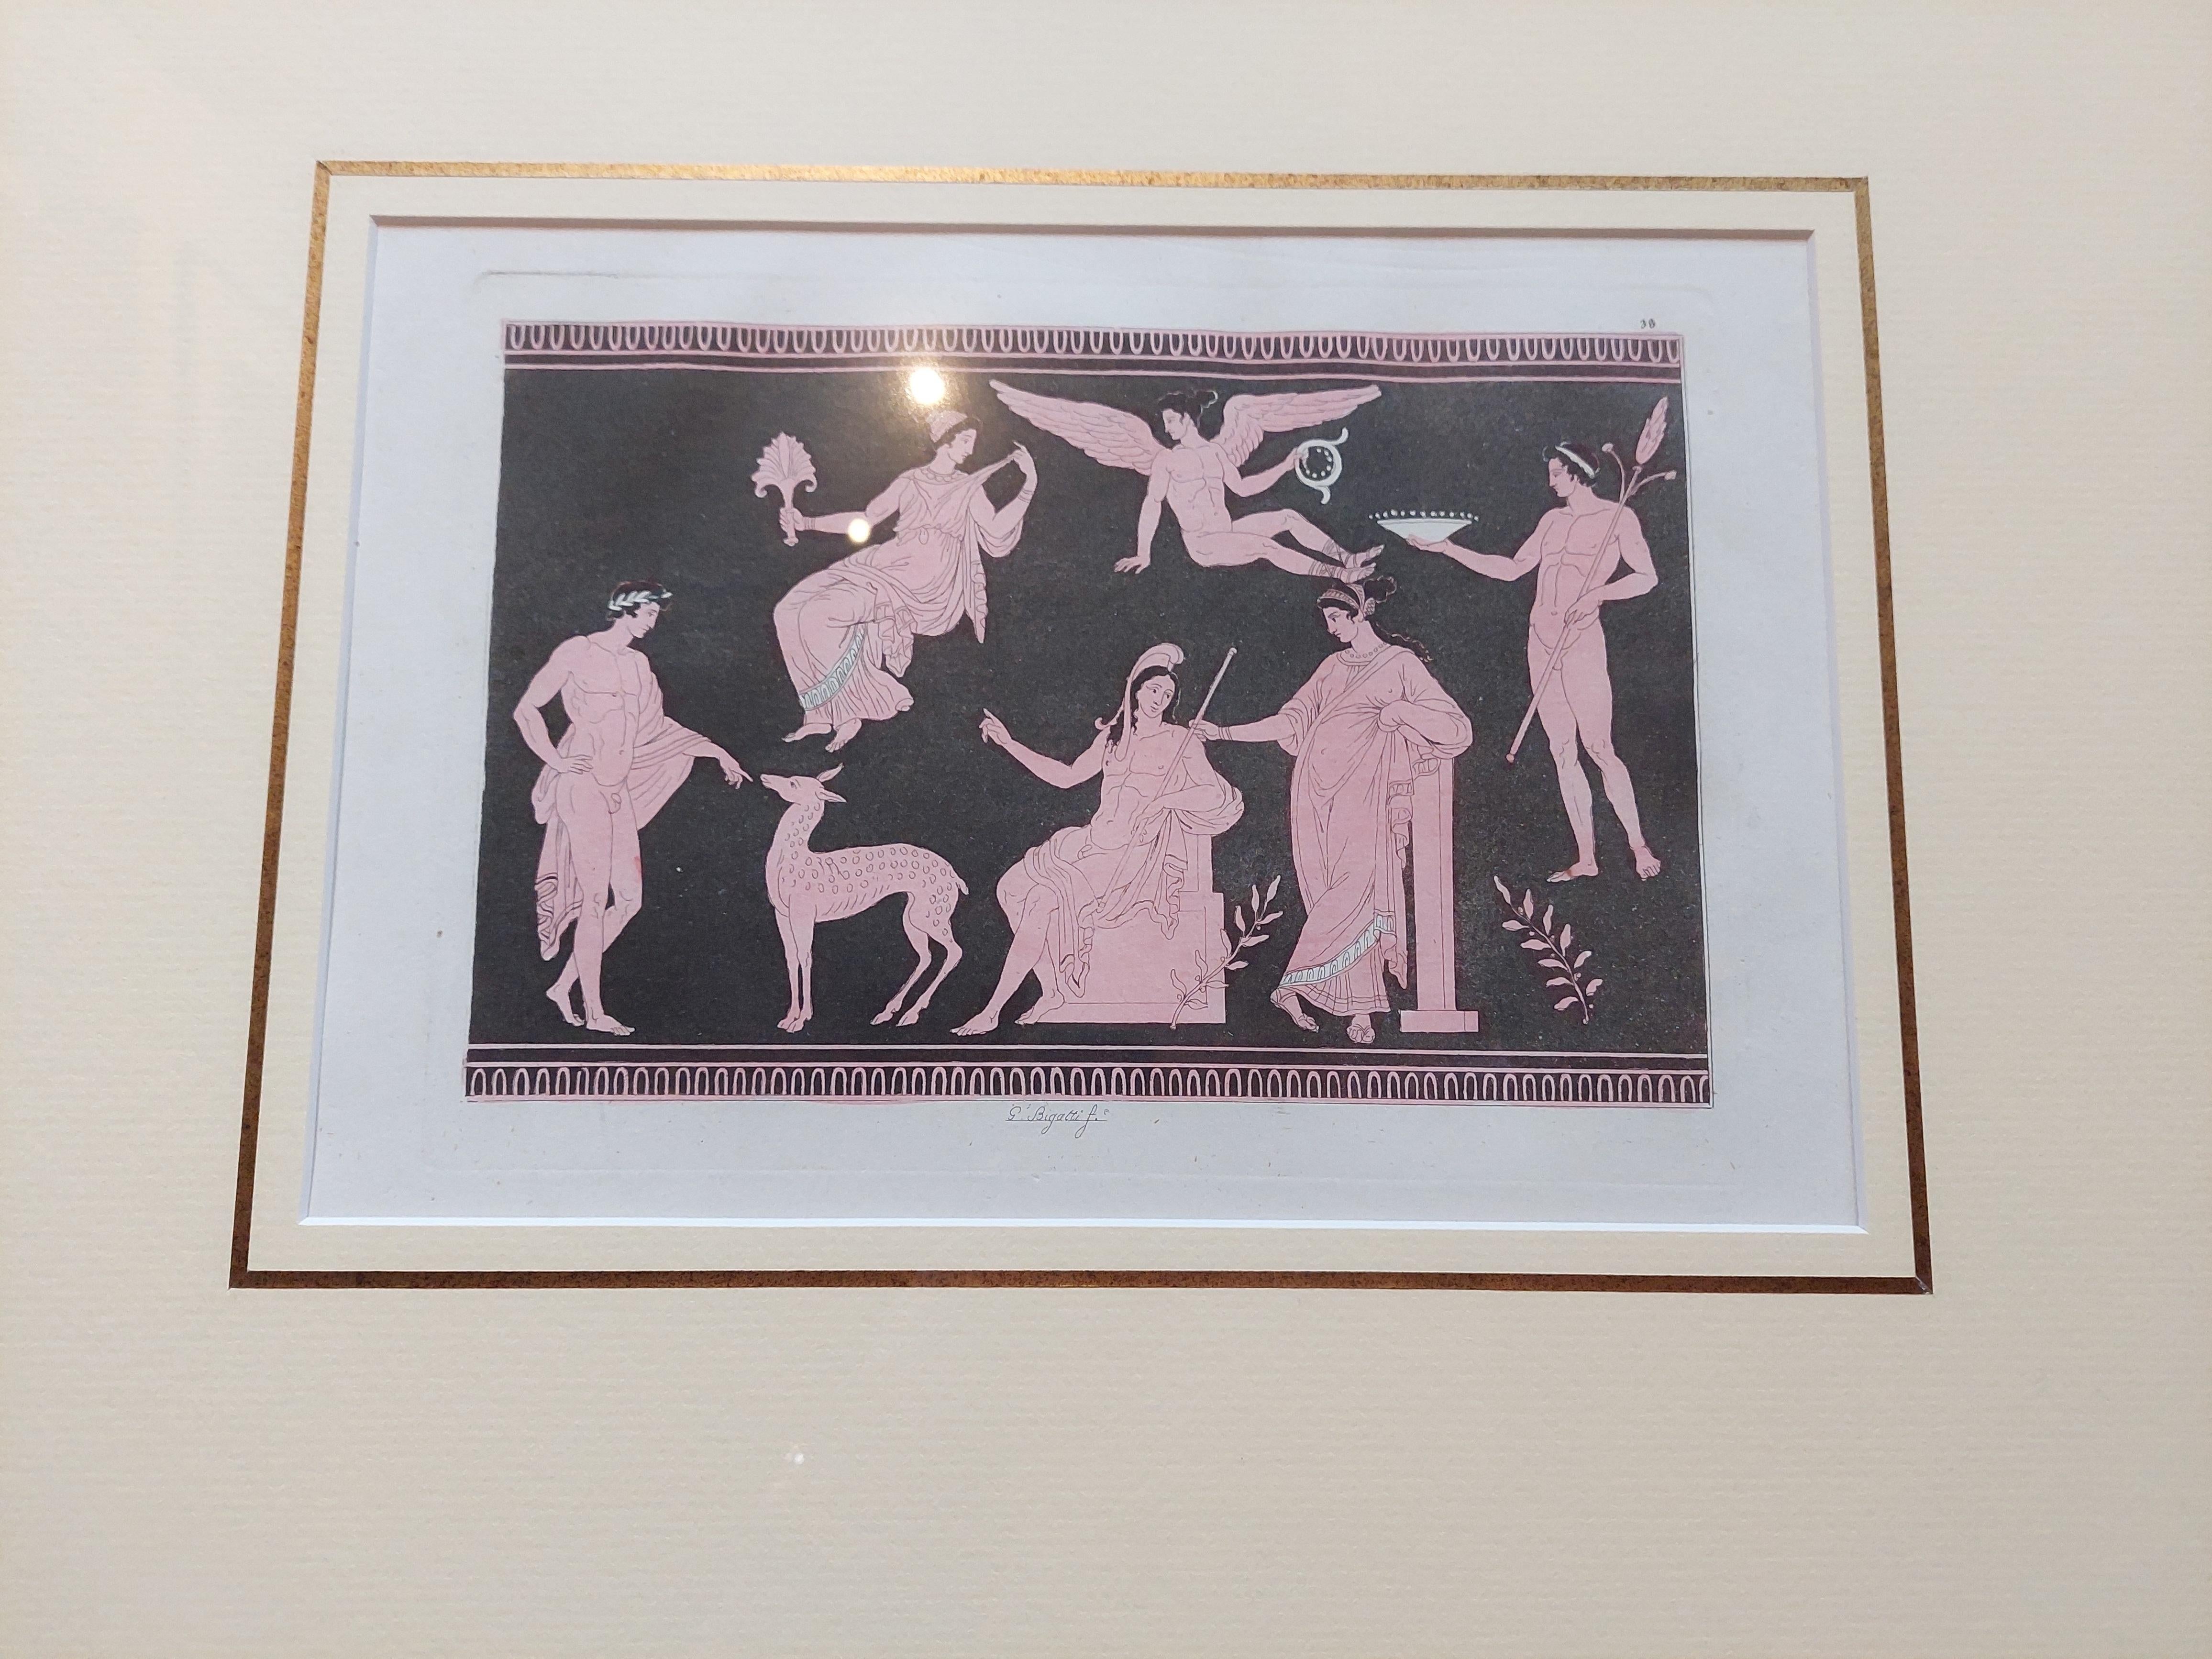 Original antique etching/aquatint of Greco-Roman art. This print originates from ‘Il Costume Antico e Moderno (..)’ , by Giulio Ferrario, published in Milan in 21 volumes by Antonio Fortunato Stella in 1827. The 17 volumes of the first issue were